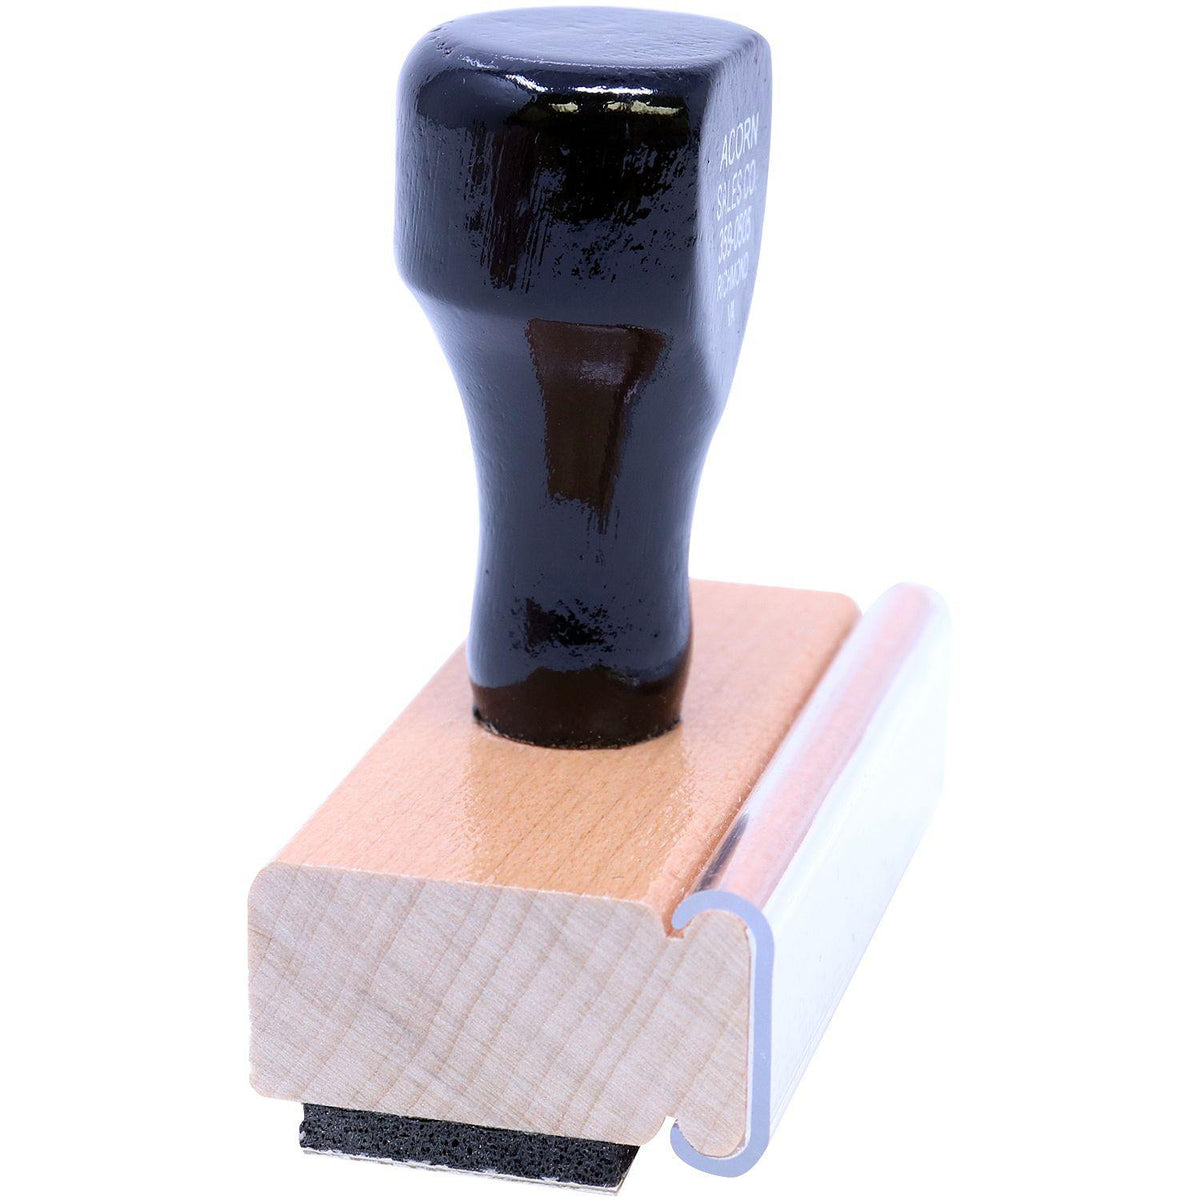 Side View of Despachado Rubber Stamp at an Angle